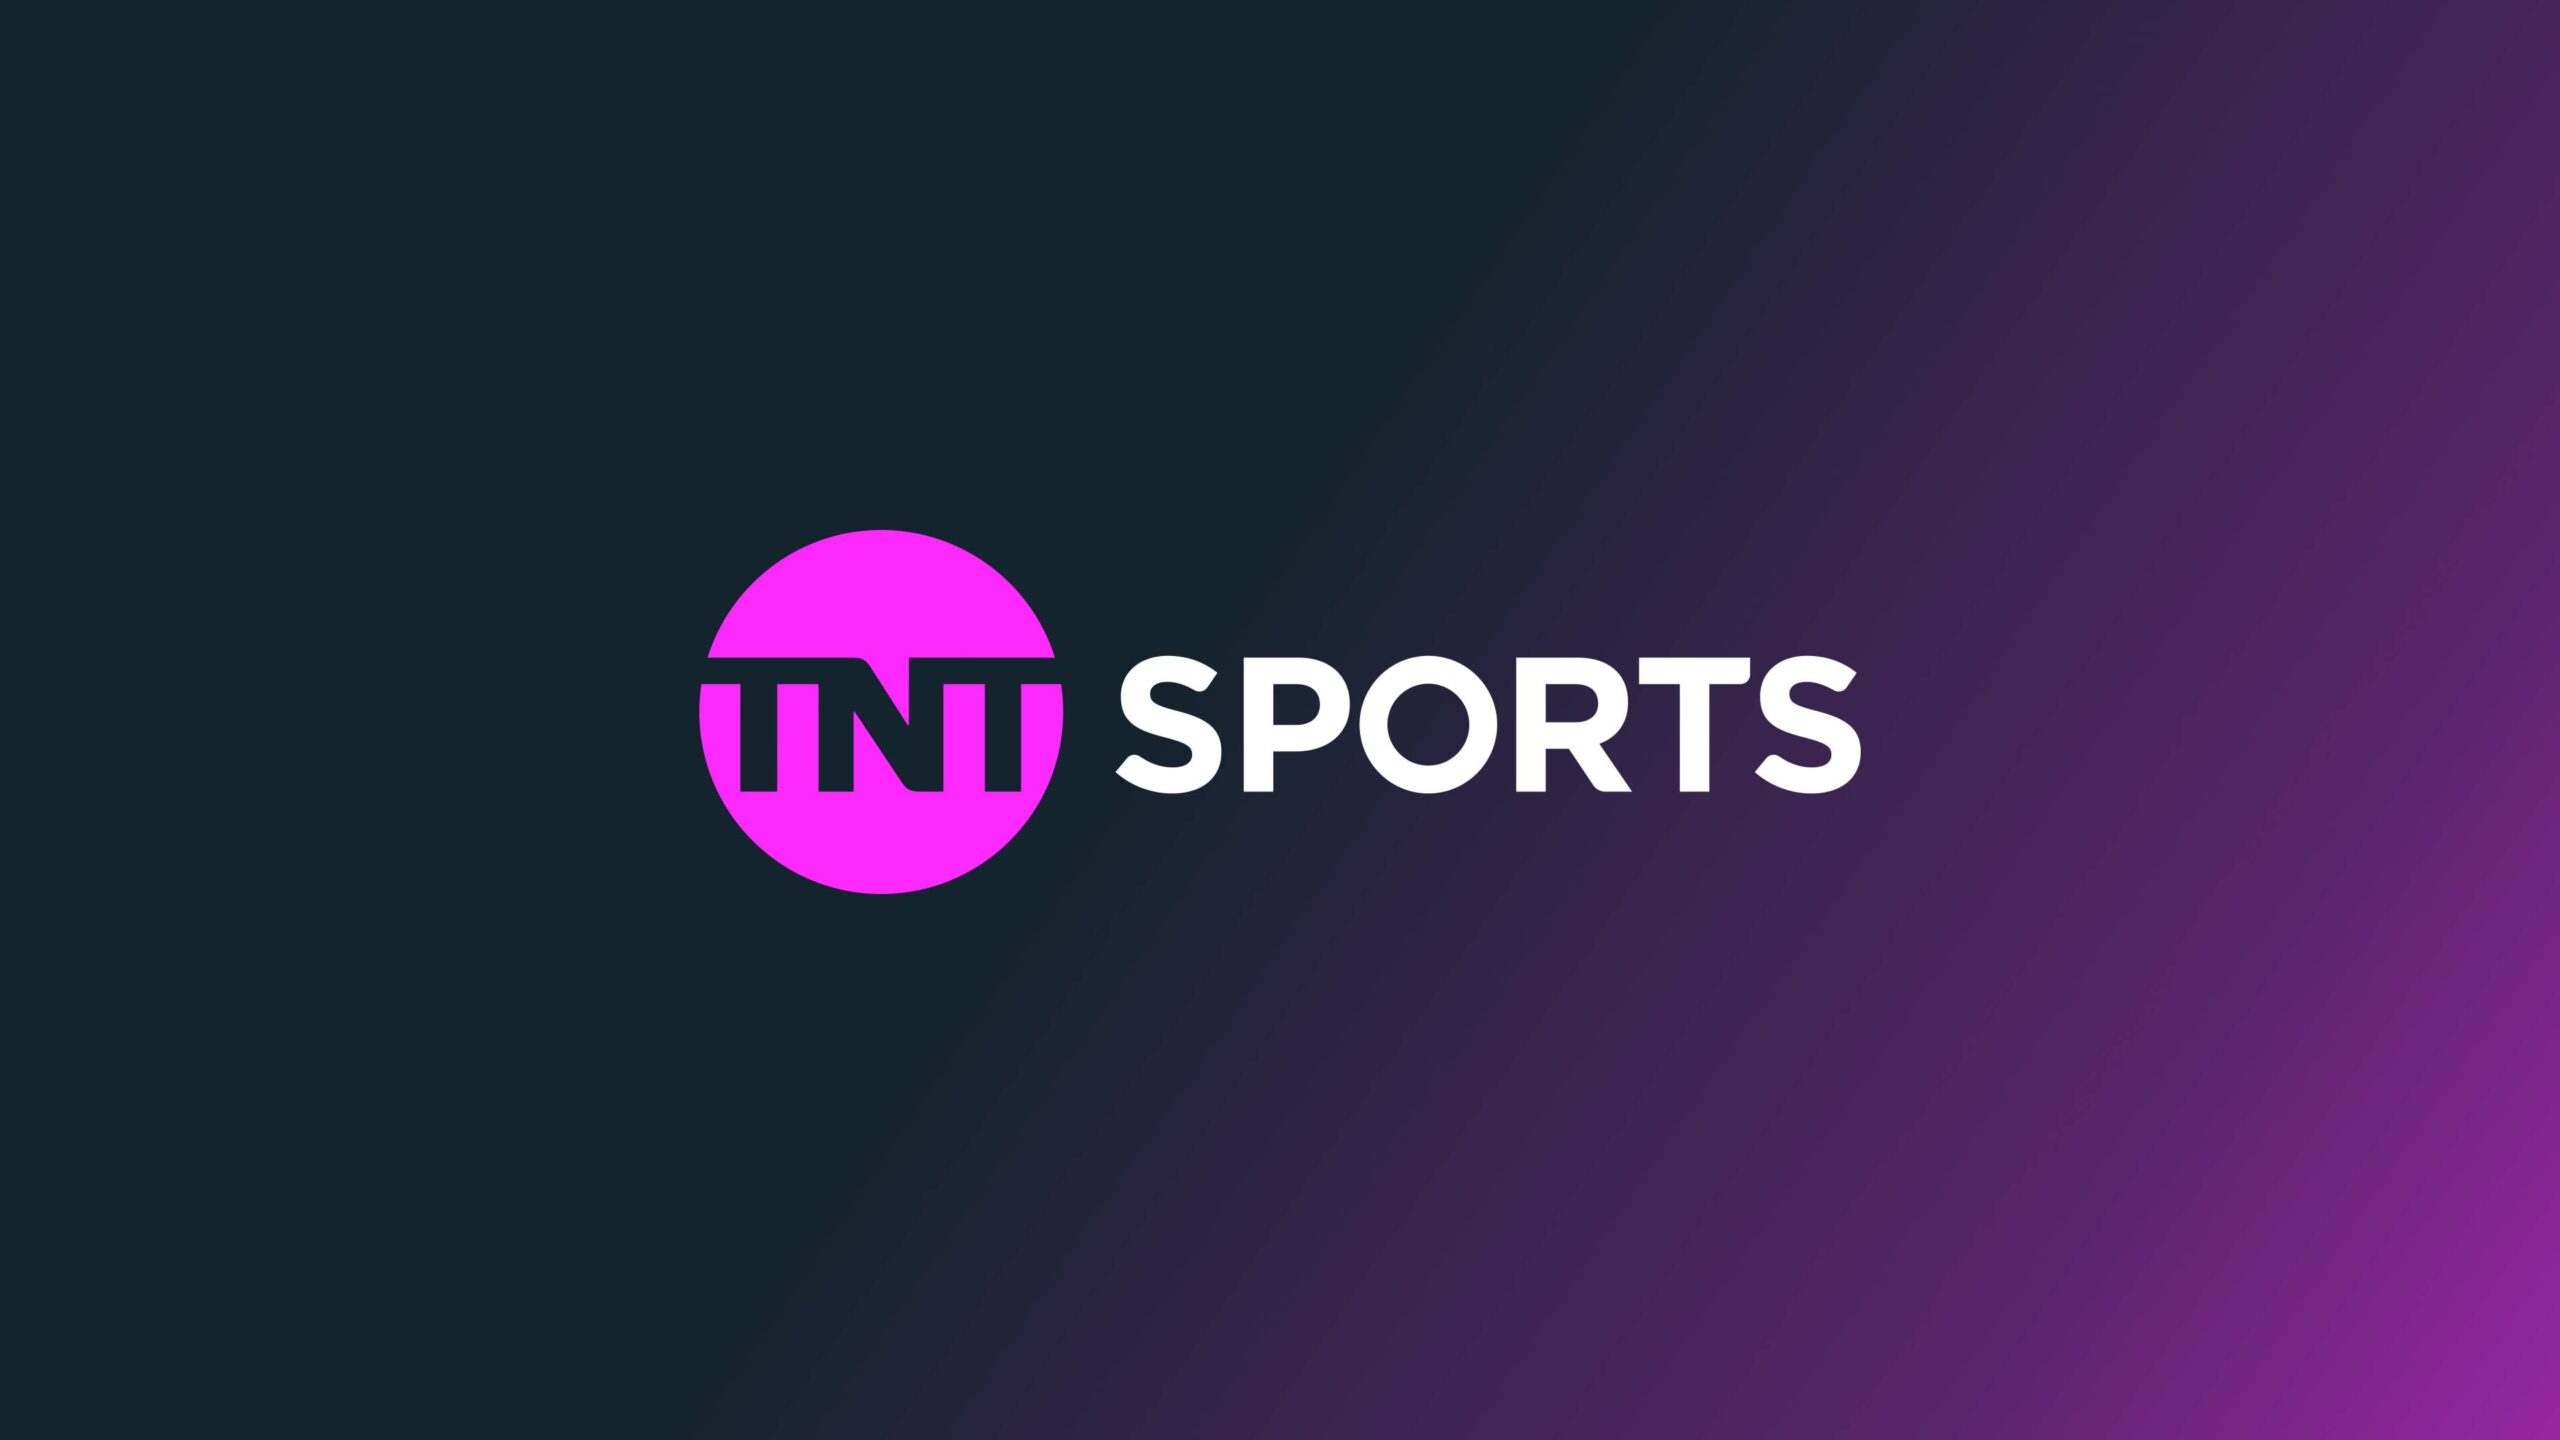 TNT Sports, The Future Name for BT Sport